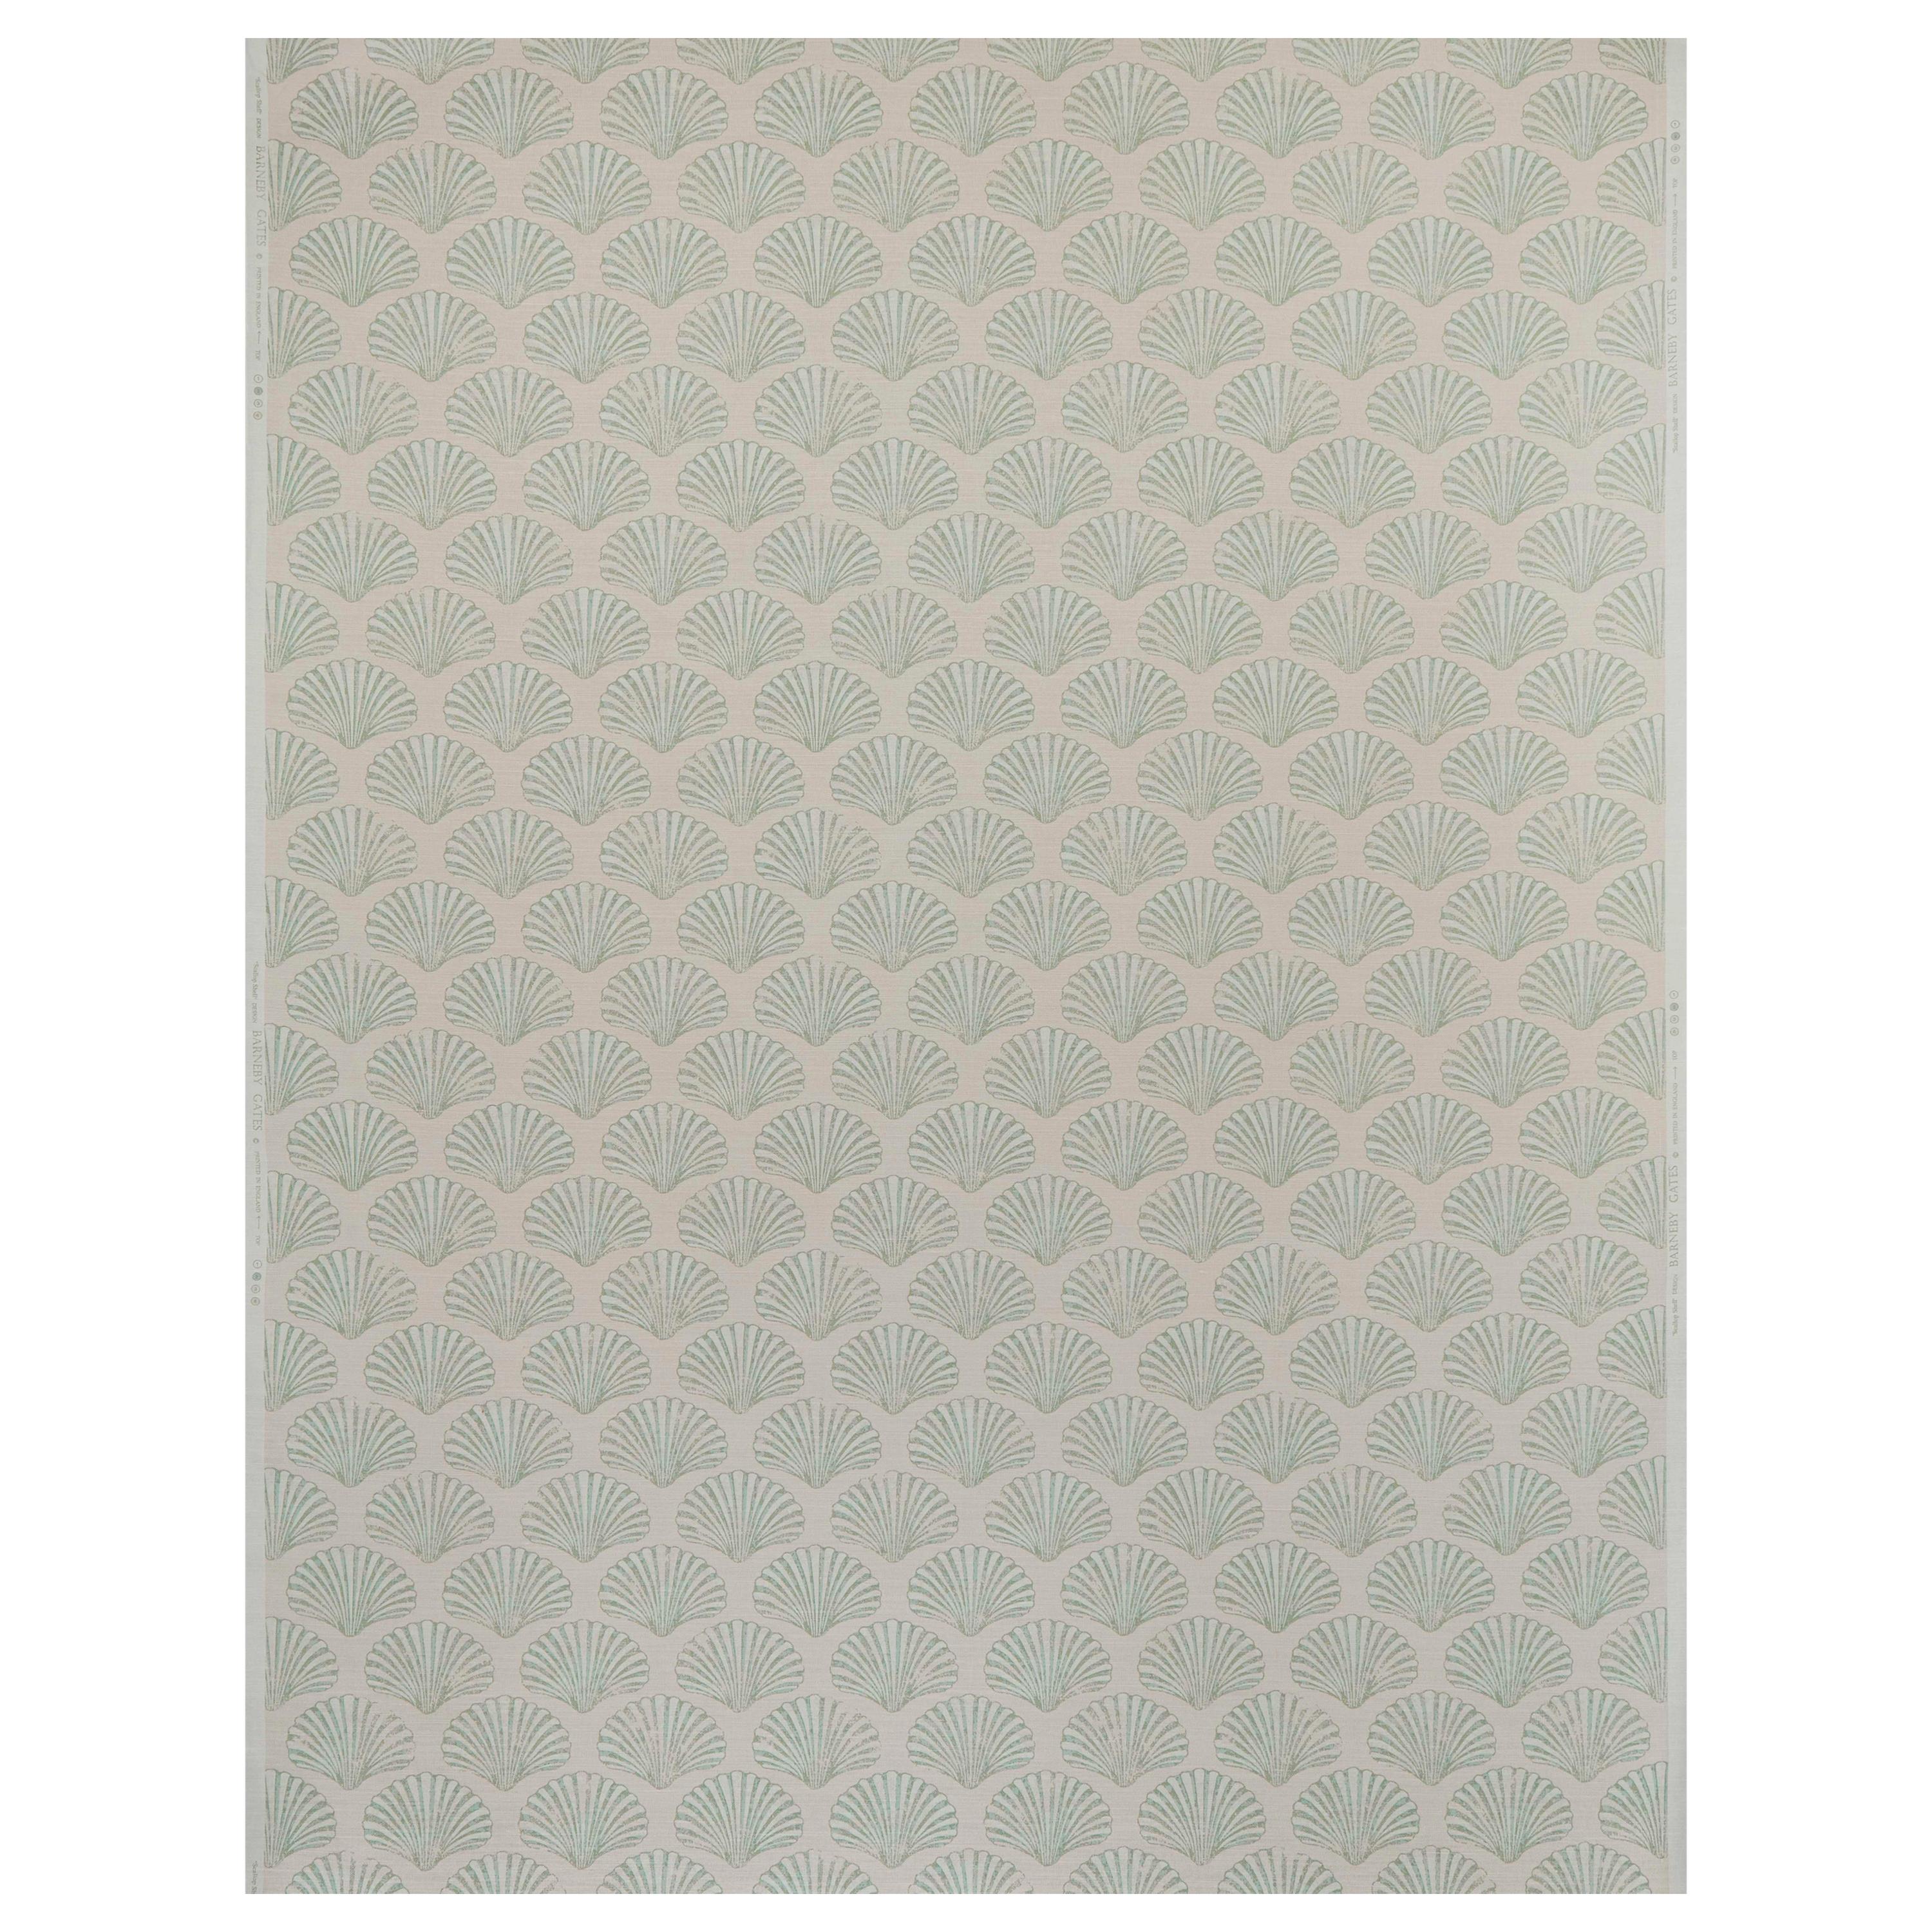 'Scallop Shell' Contemporary, Traditional Fabric in Plaster/Green For Sale